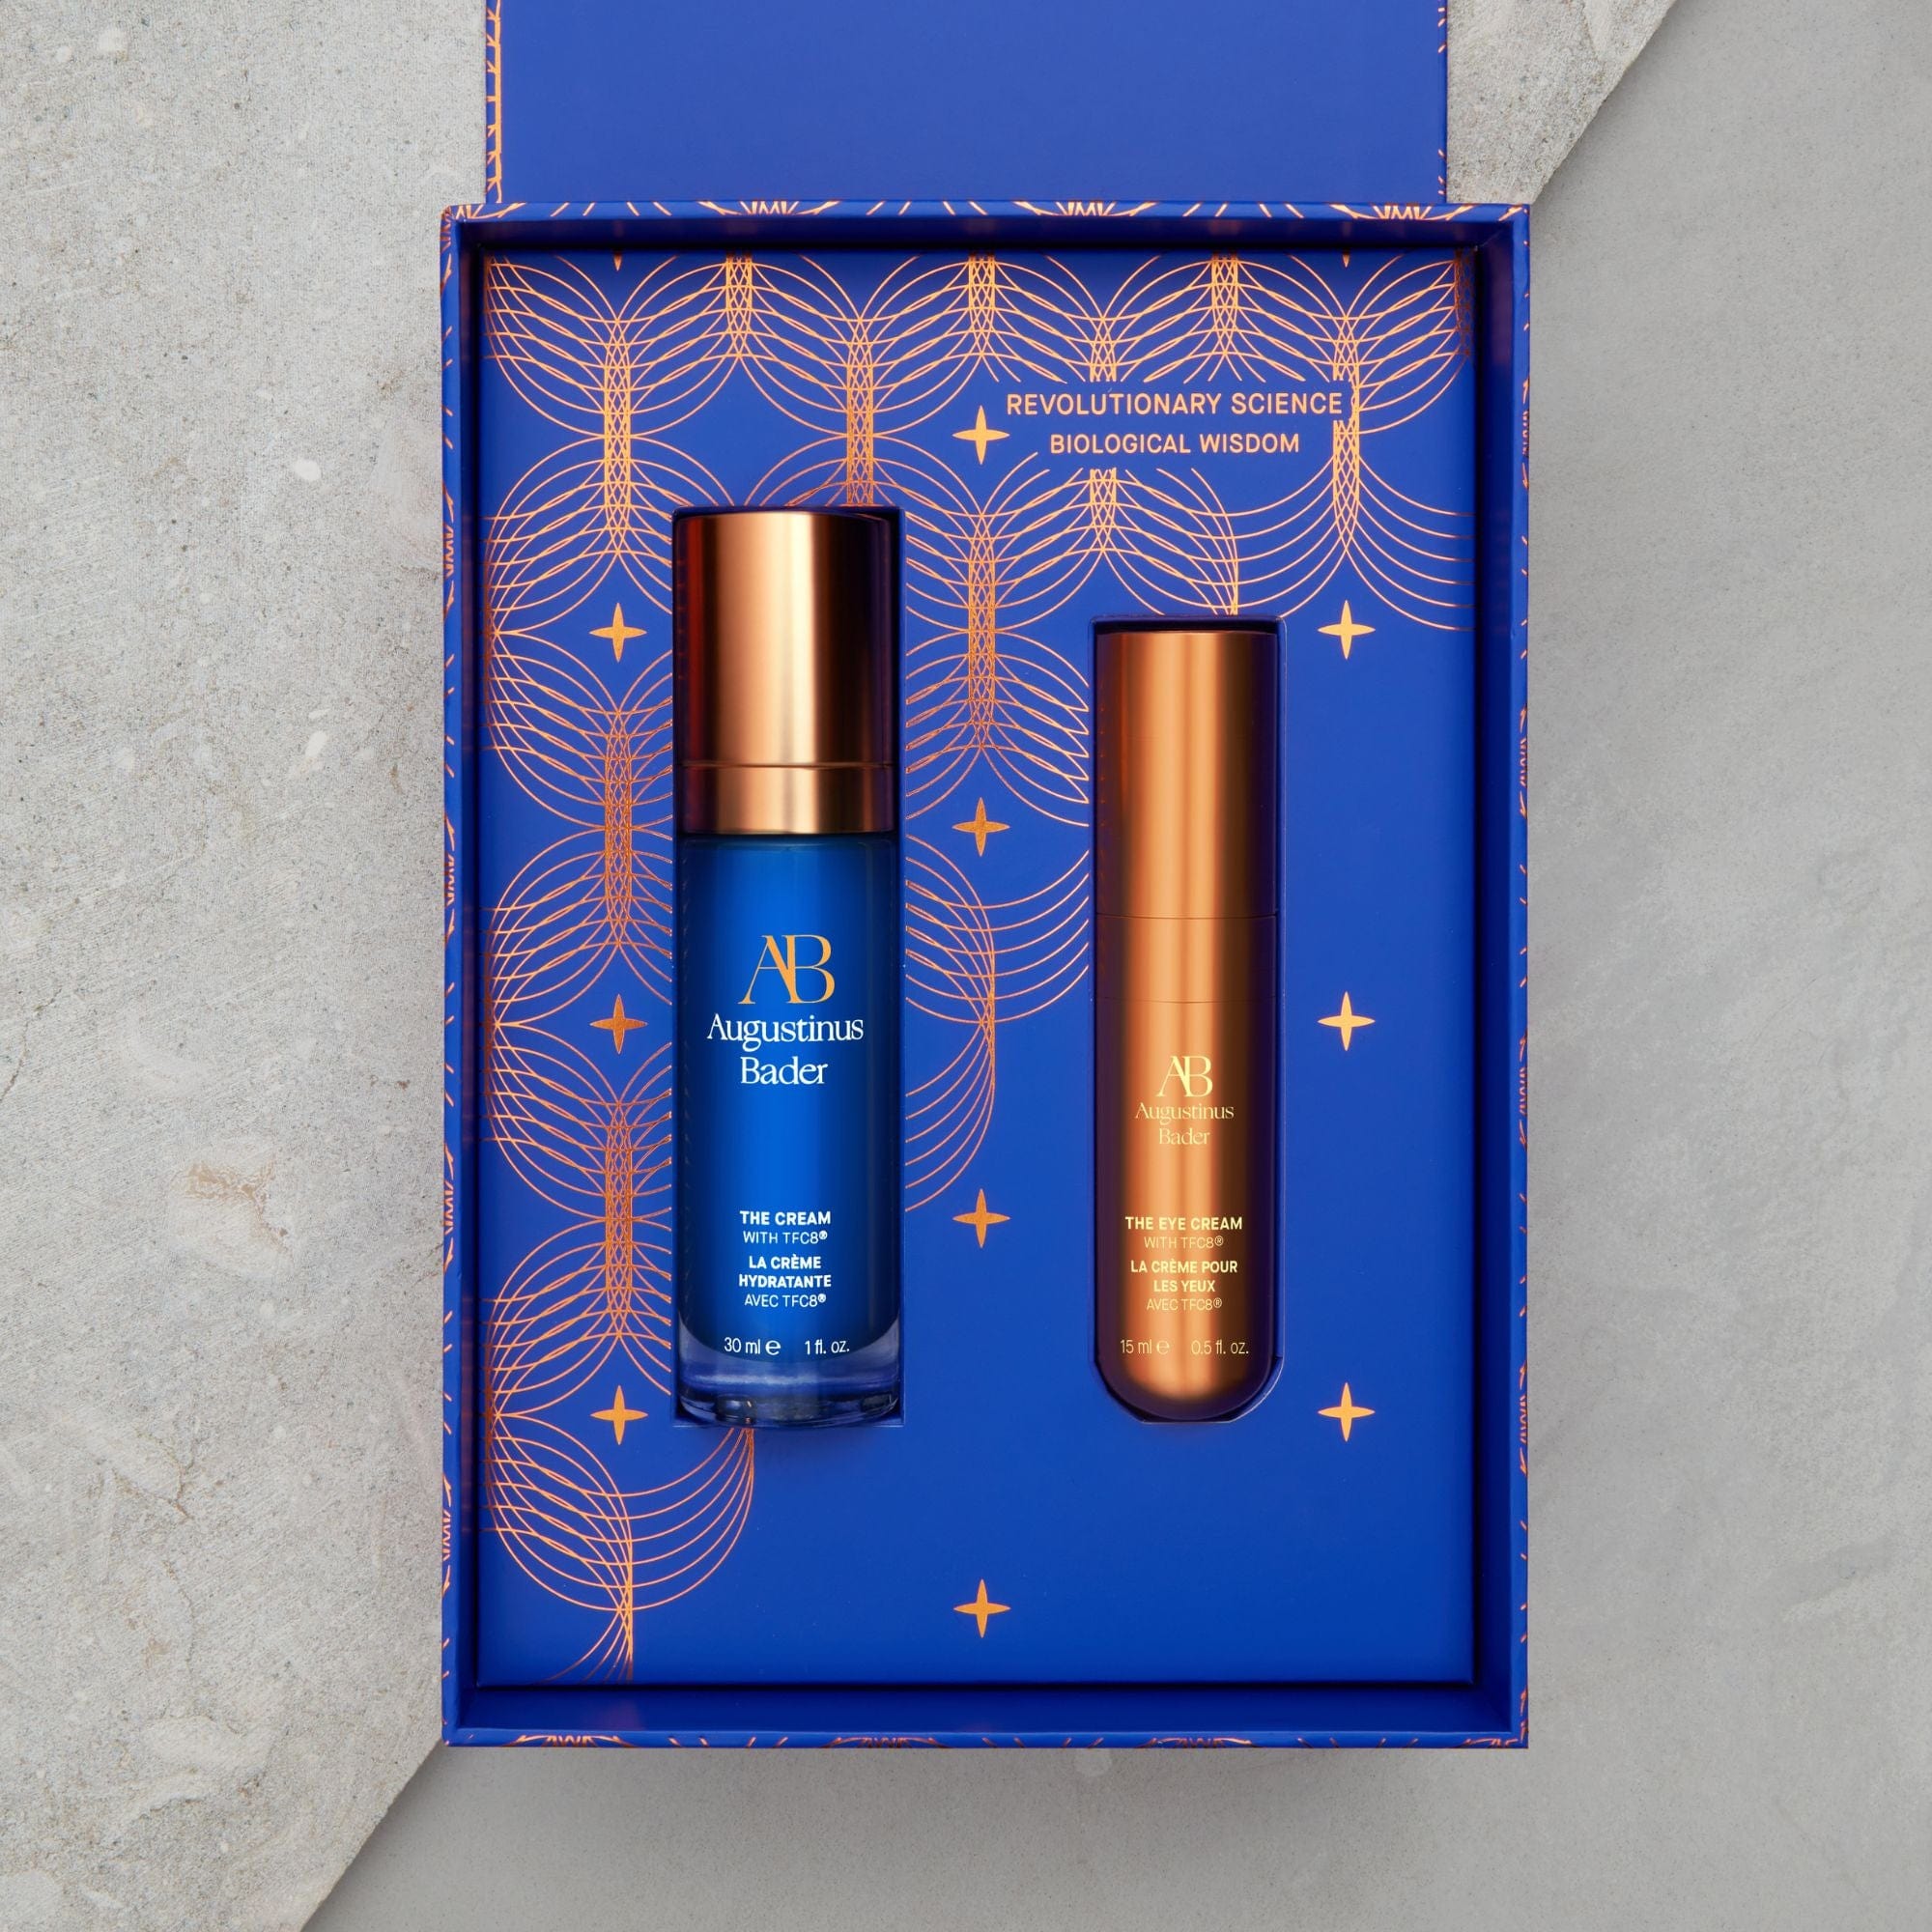 The Renewal Icons with The Cream Augustinus Bader Moisturizing Set